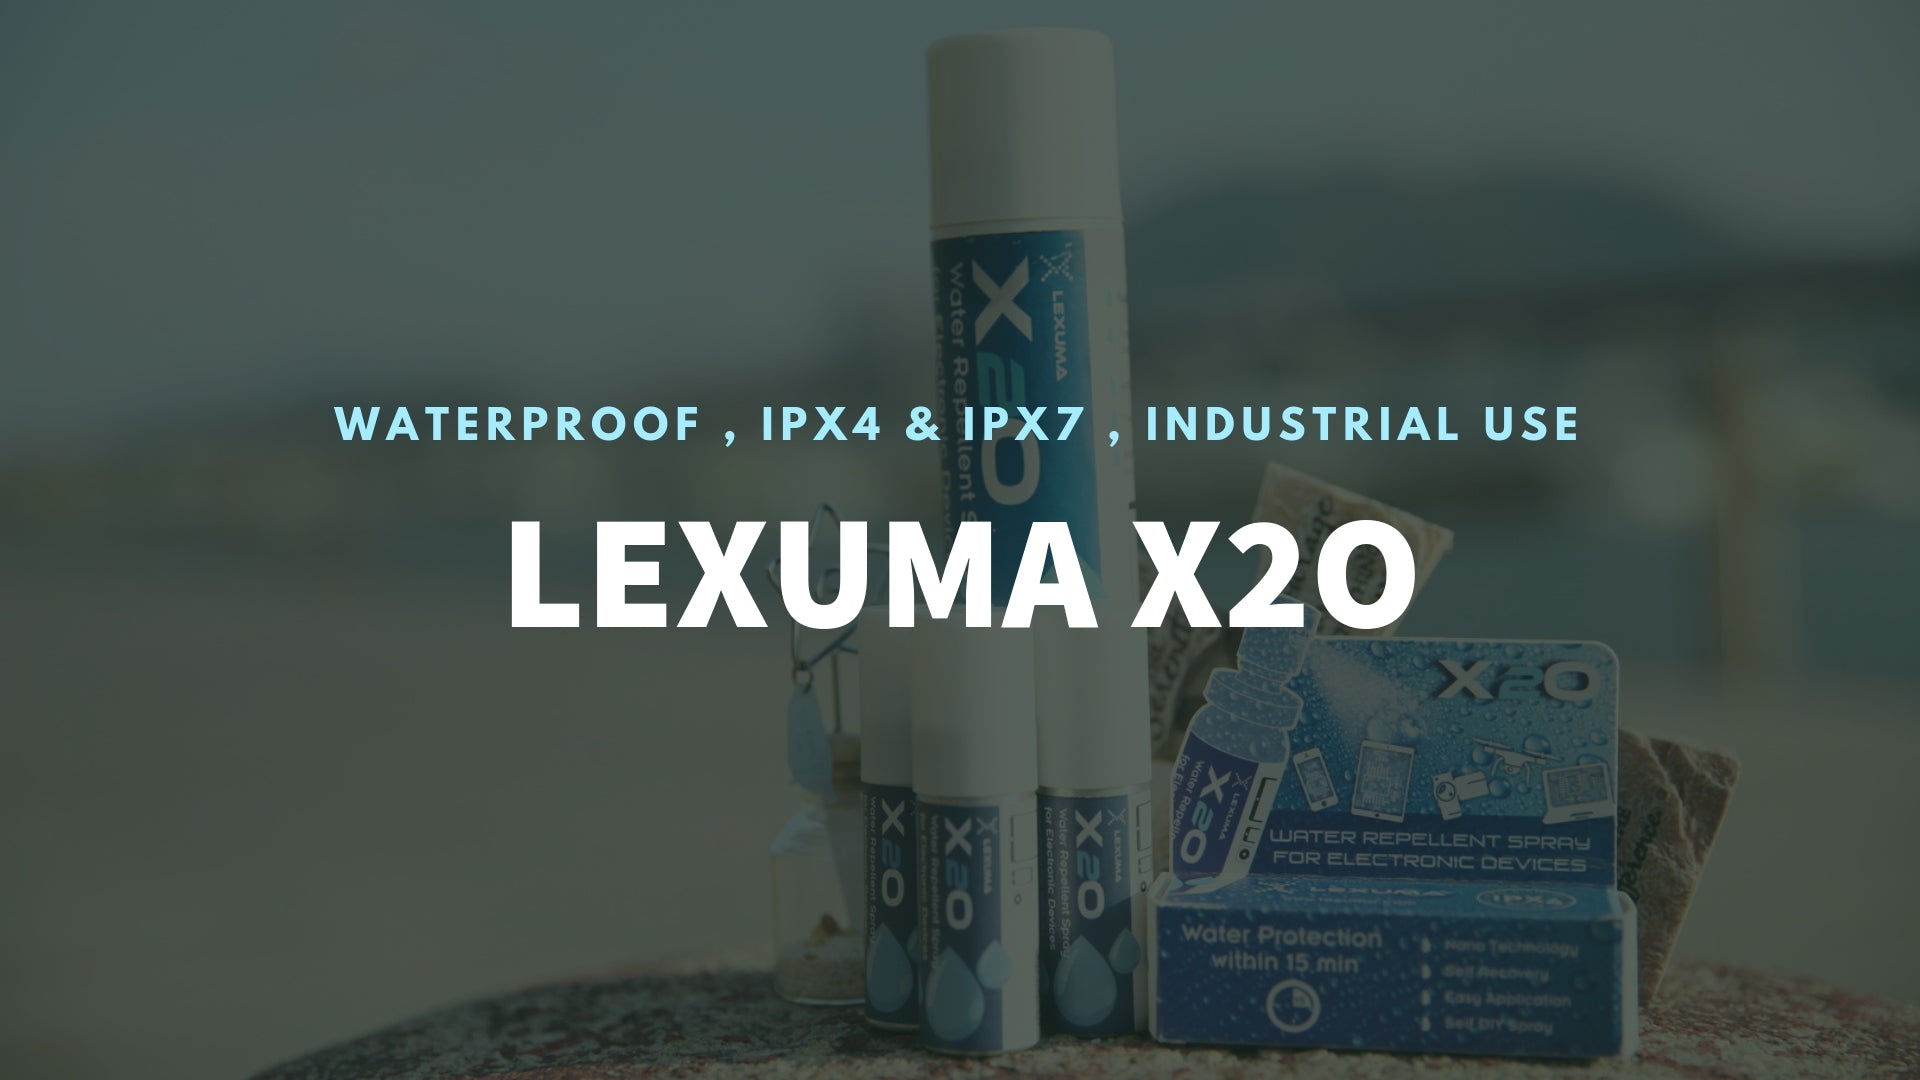 Lexuma 辣數碼防水鍍膜噴霧 X20 Water Repellent Spray with IPX4 and IPX7 water protection